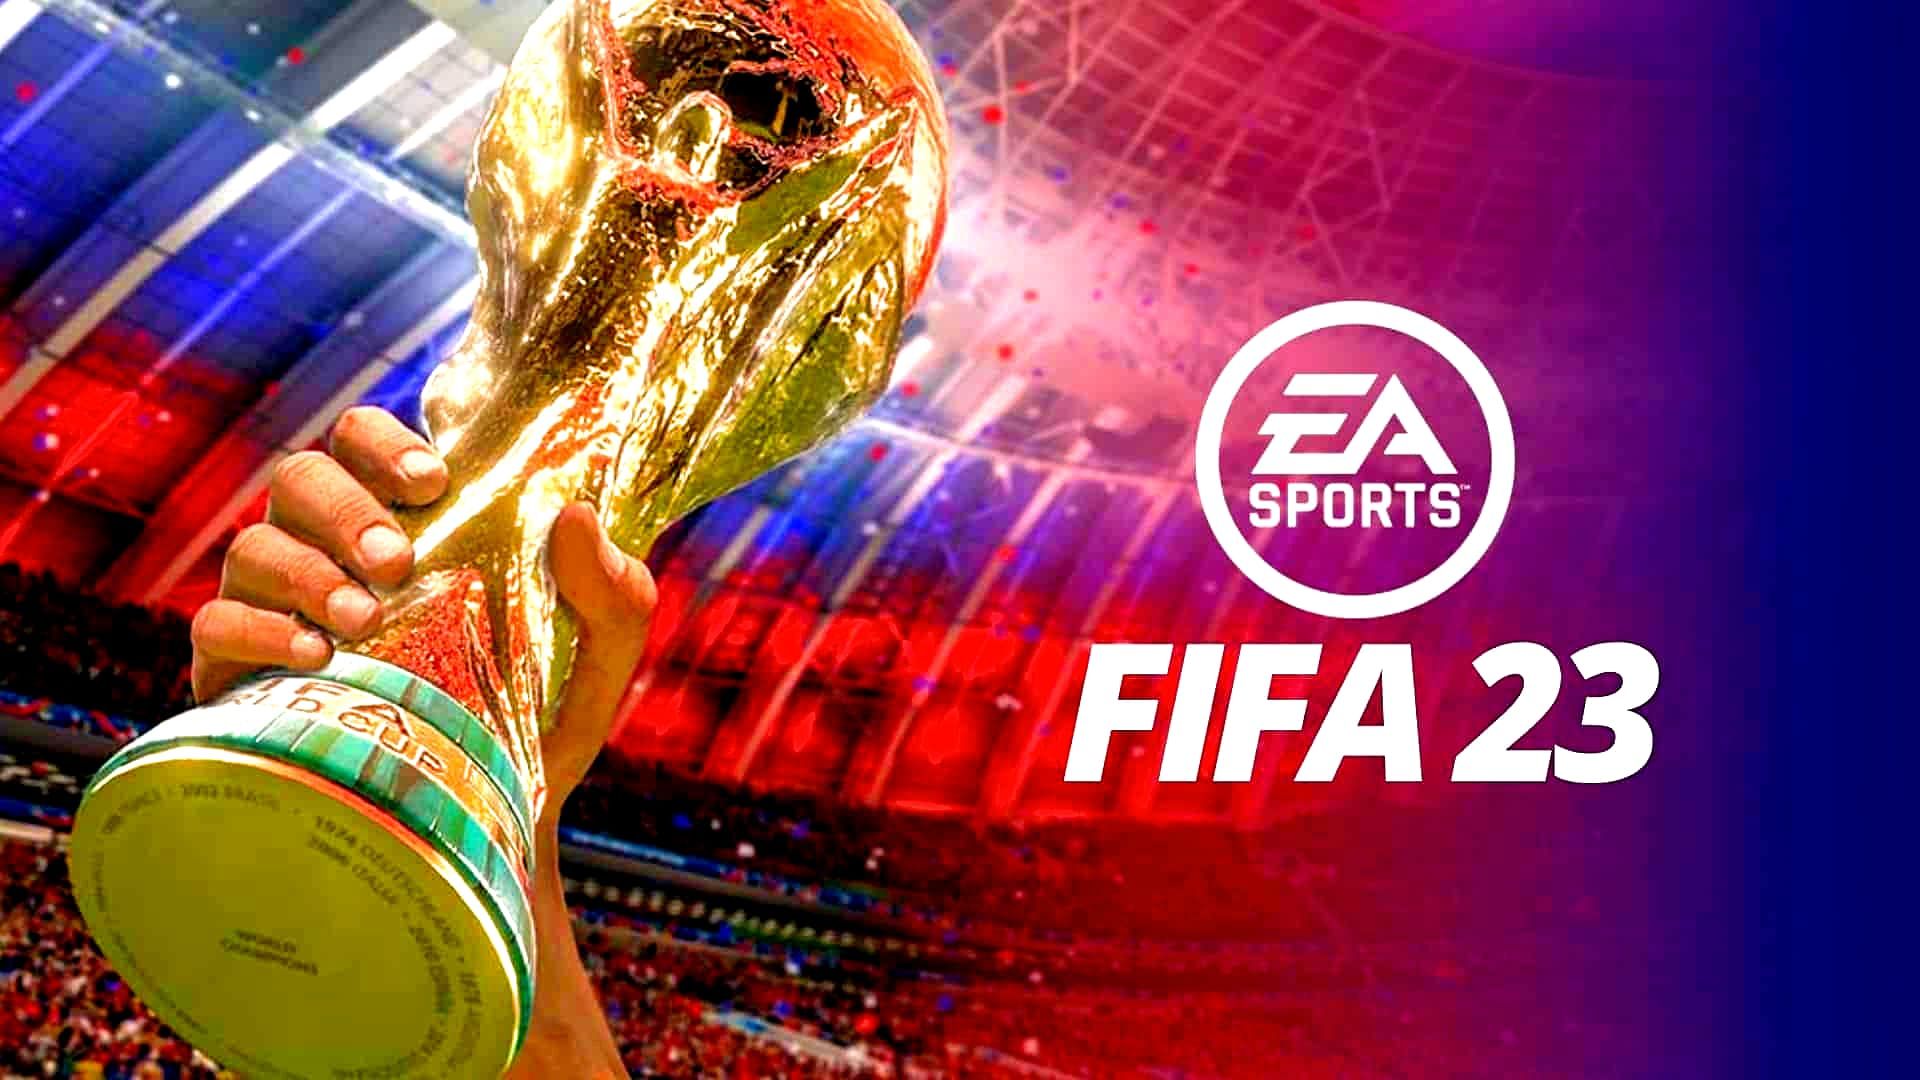 It has been revealed which leagues will be in FIFA 23, which is preparing to be the last FIFA game before its name changes to EA Sports FC. The new game in...